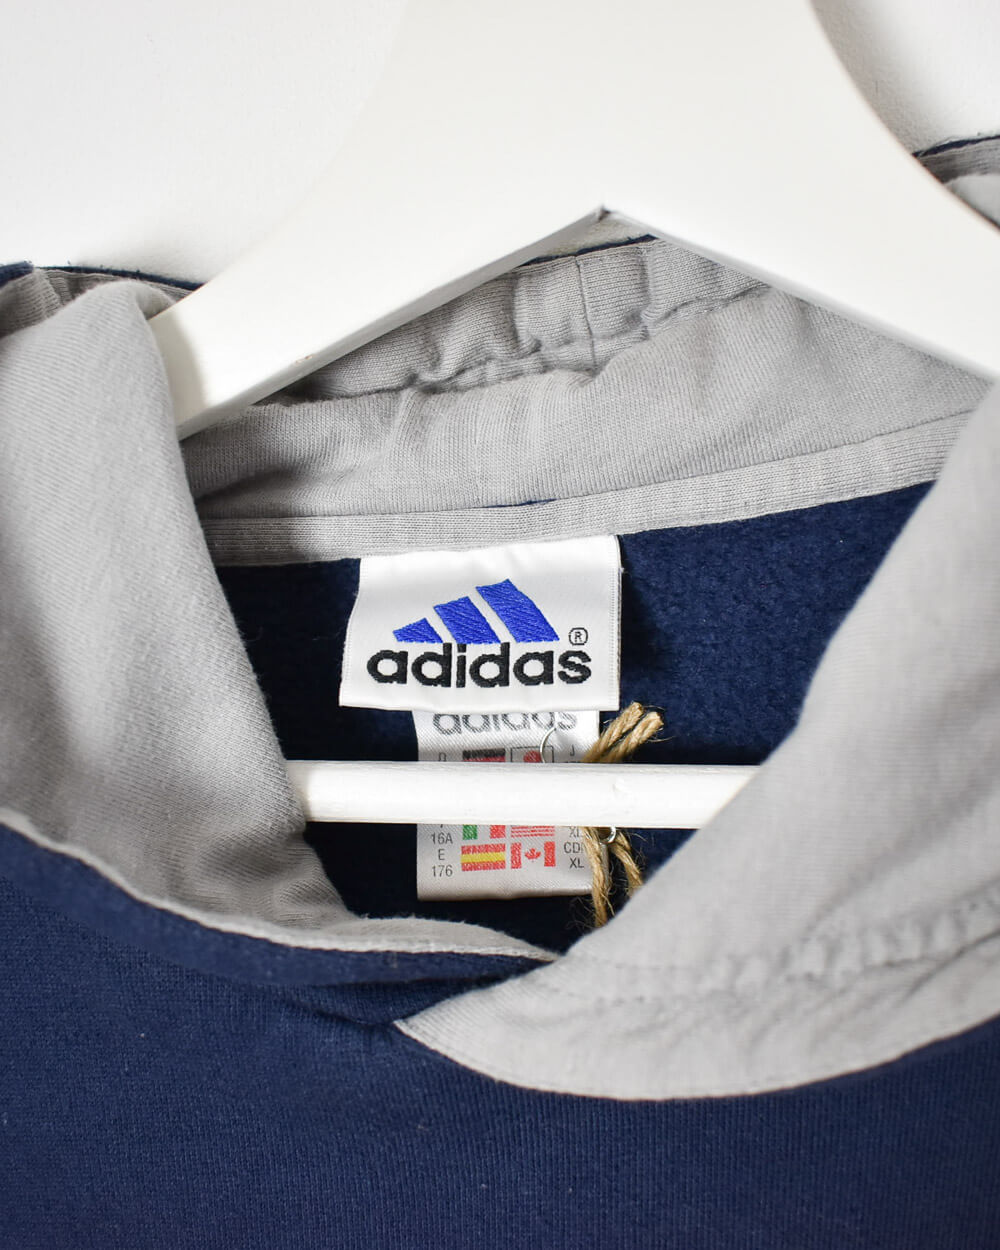 Adidas Athletic Club Hoodie - Small - Domno Vintage 90s, 80s, 00s Retro and Vintage Clothing 